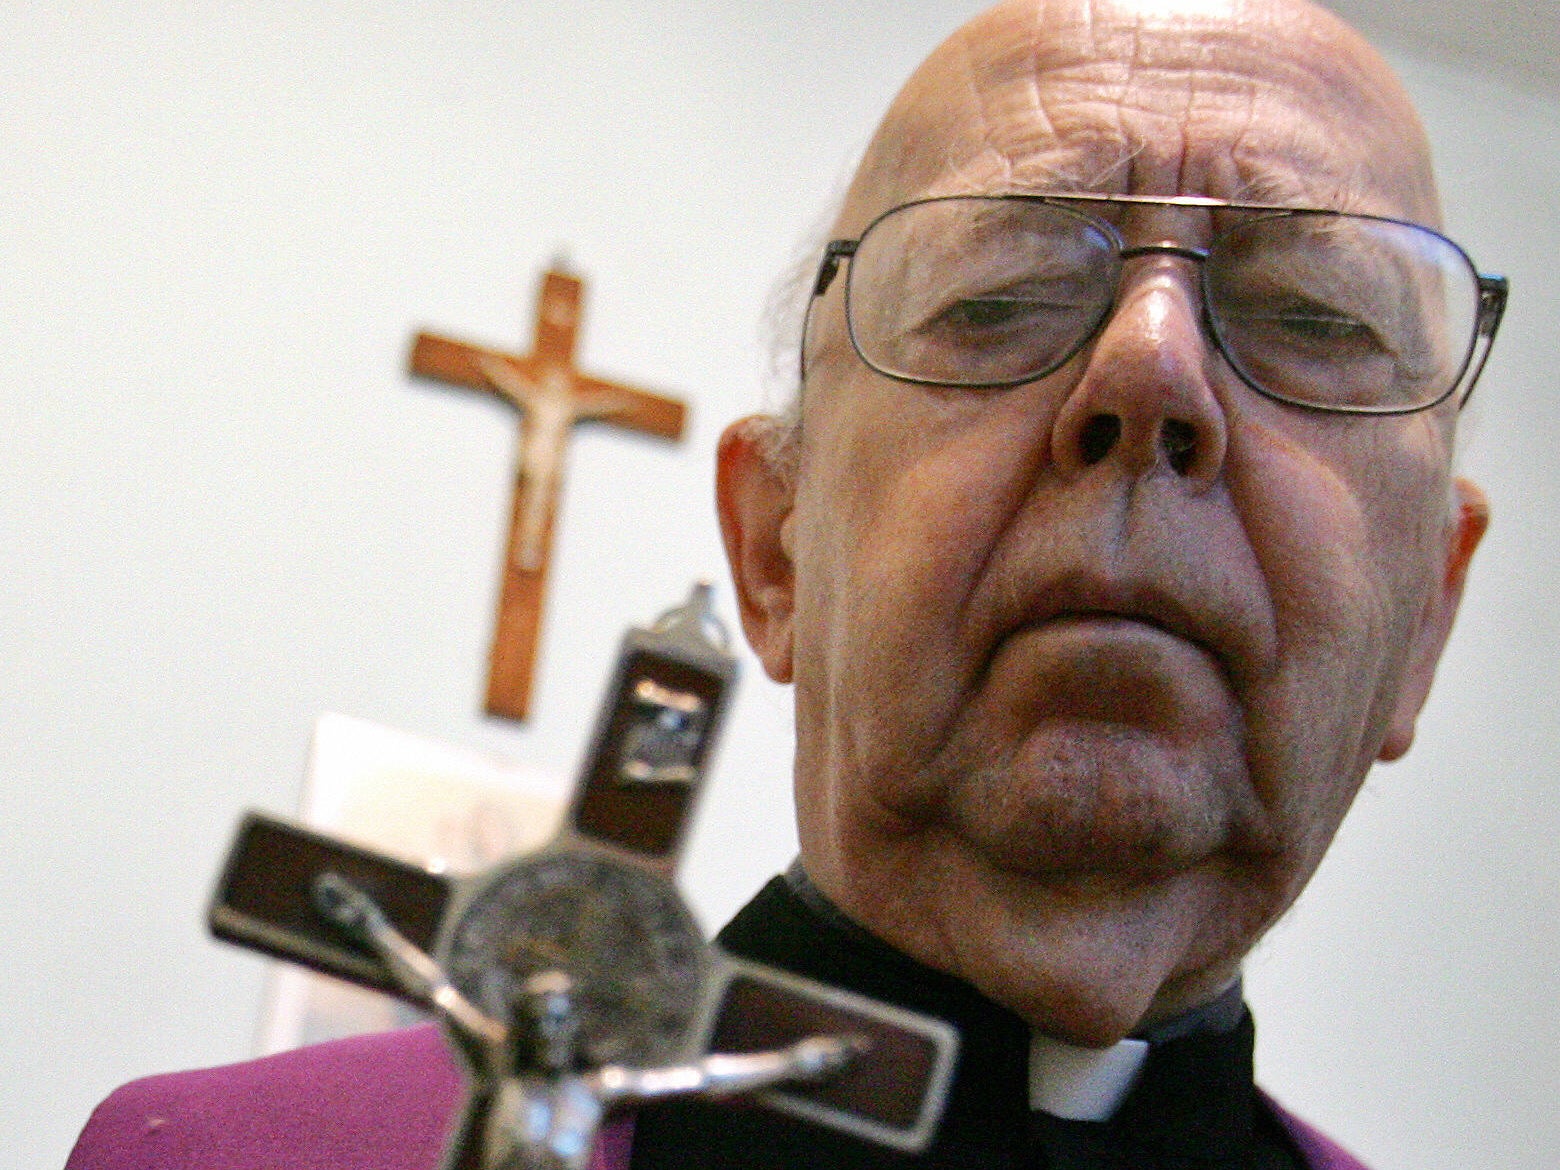 Father Gabriele Amorth claimed to have carried out 70,000 exorcisms